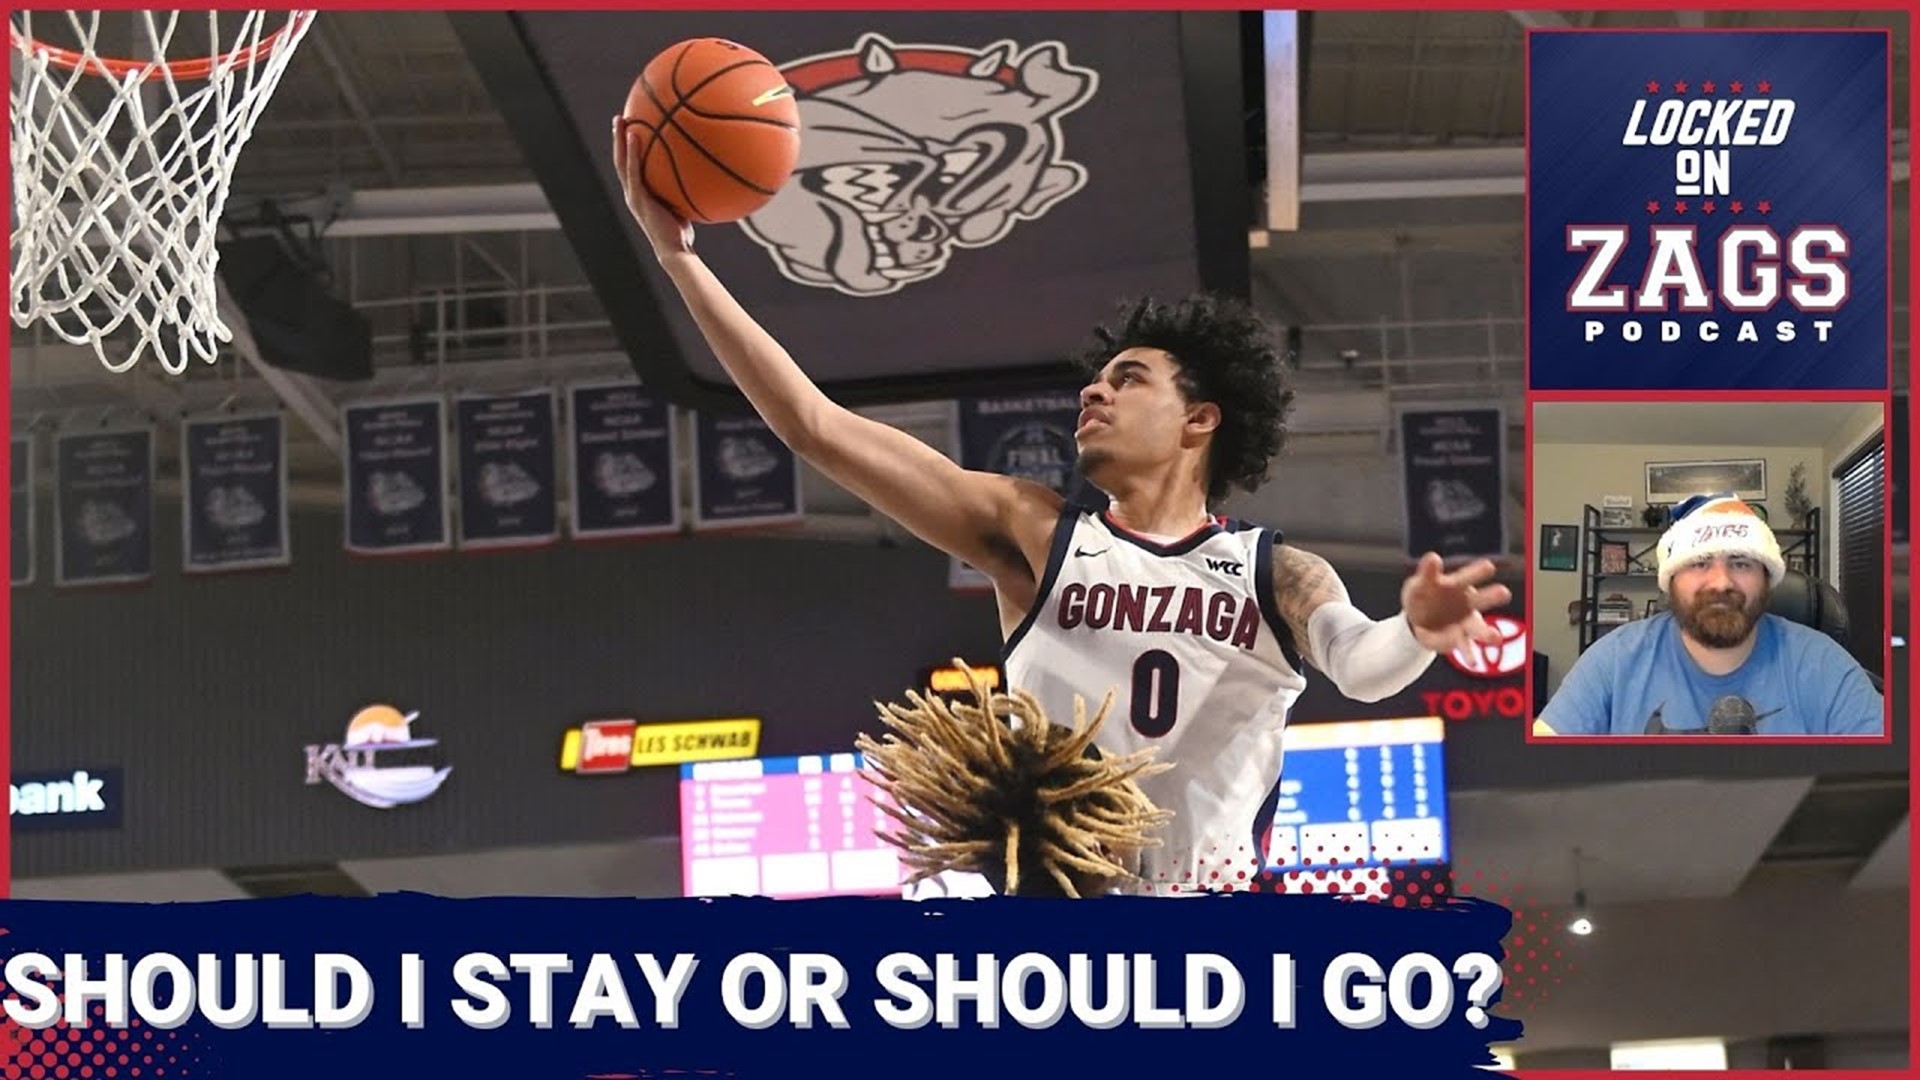 Gonzaga Bulldogs forward Julian Strawther will eventually be an NBA player. We discuss Strawther's season so far and whether we think he will depart for the NBA.